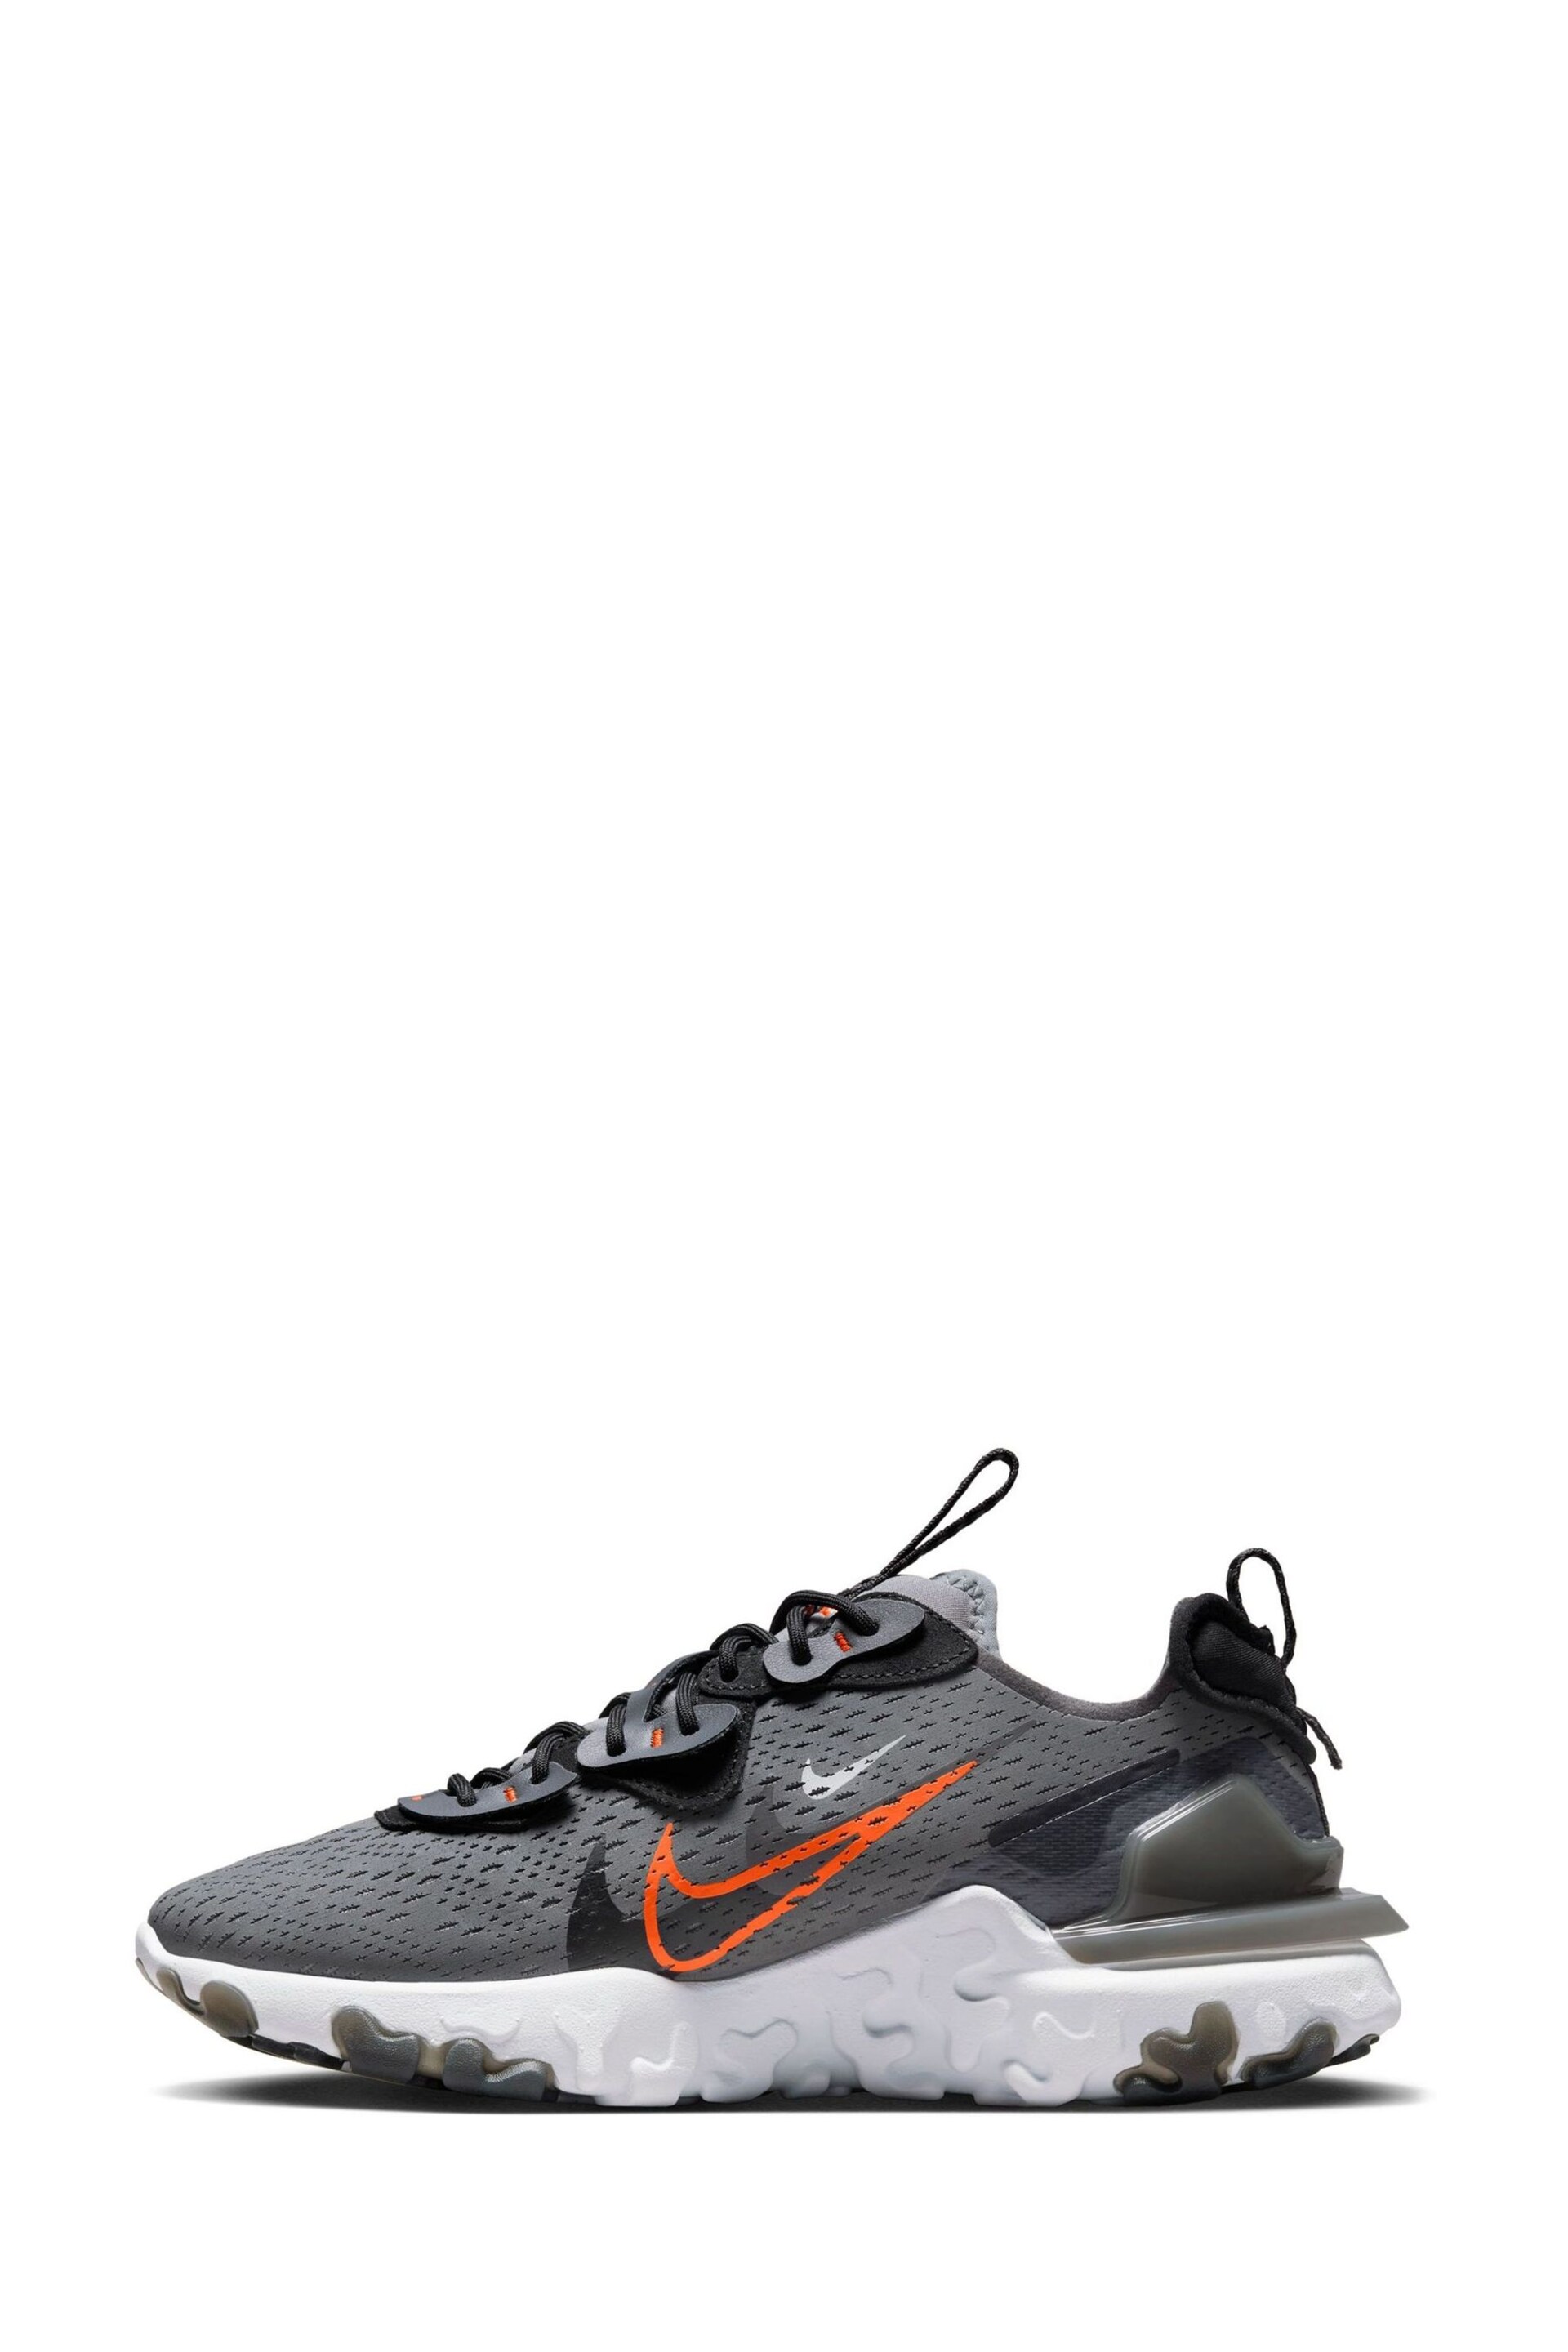 Nike Grey React Vision Trainers - Image 4 of 10